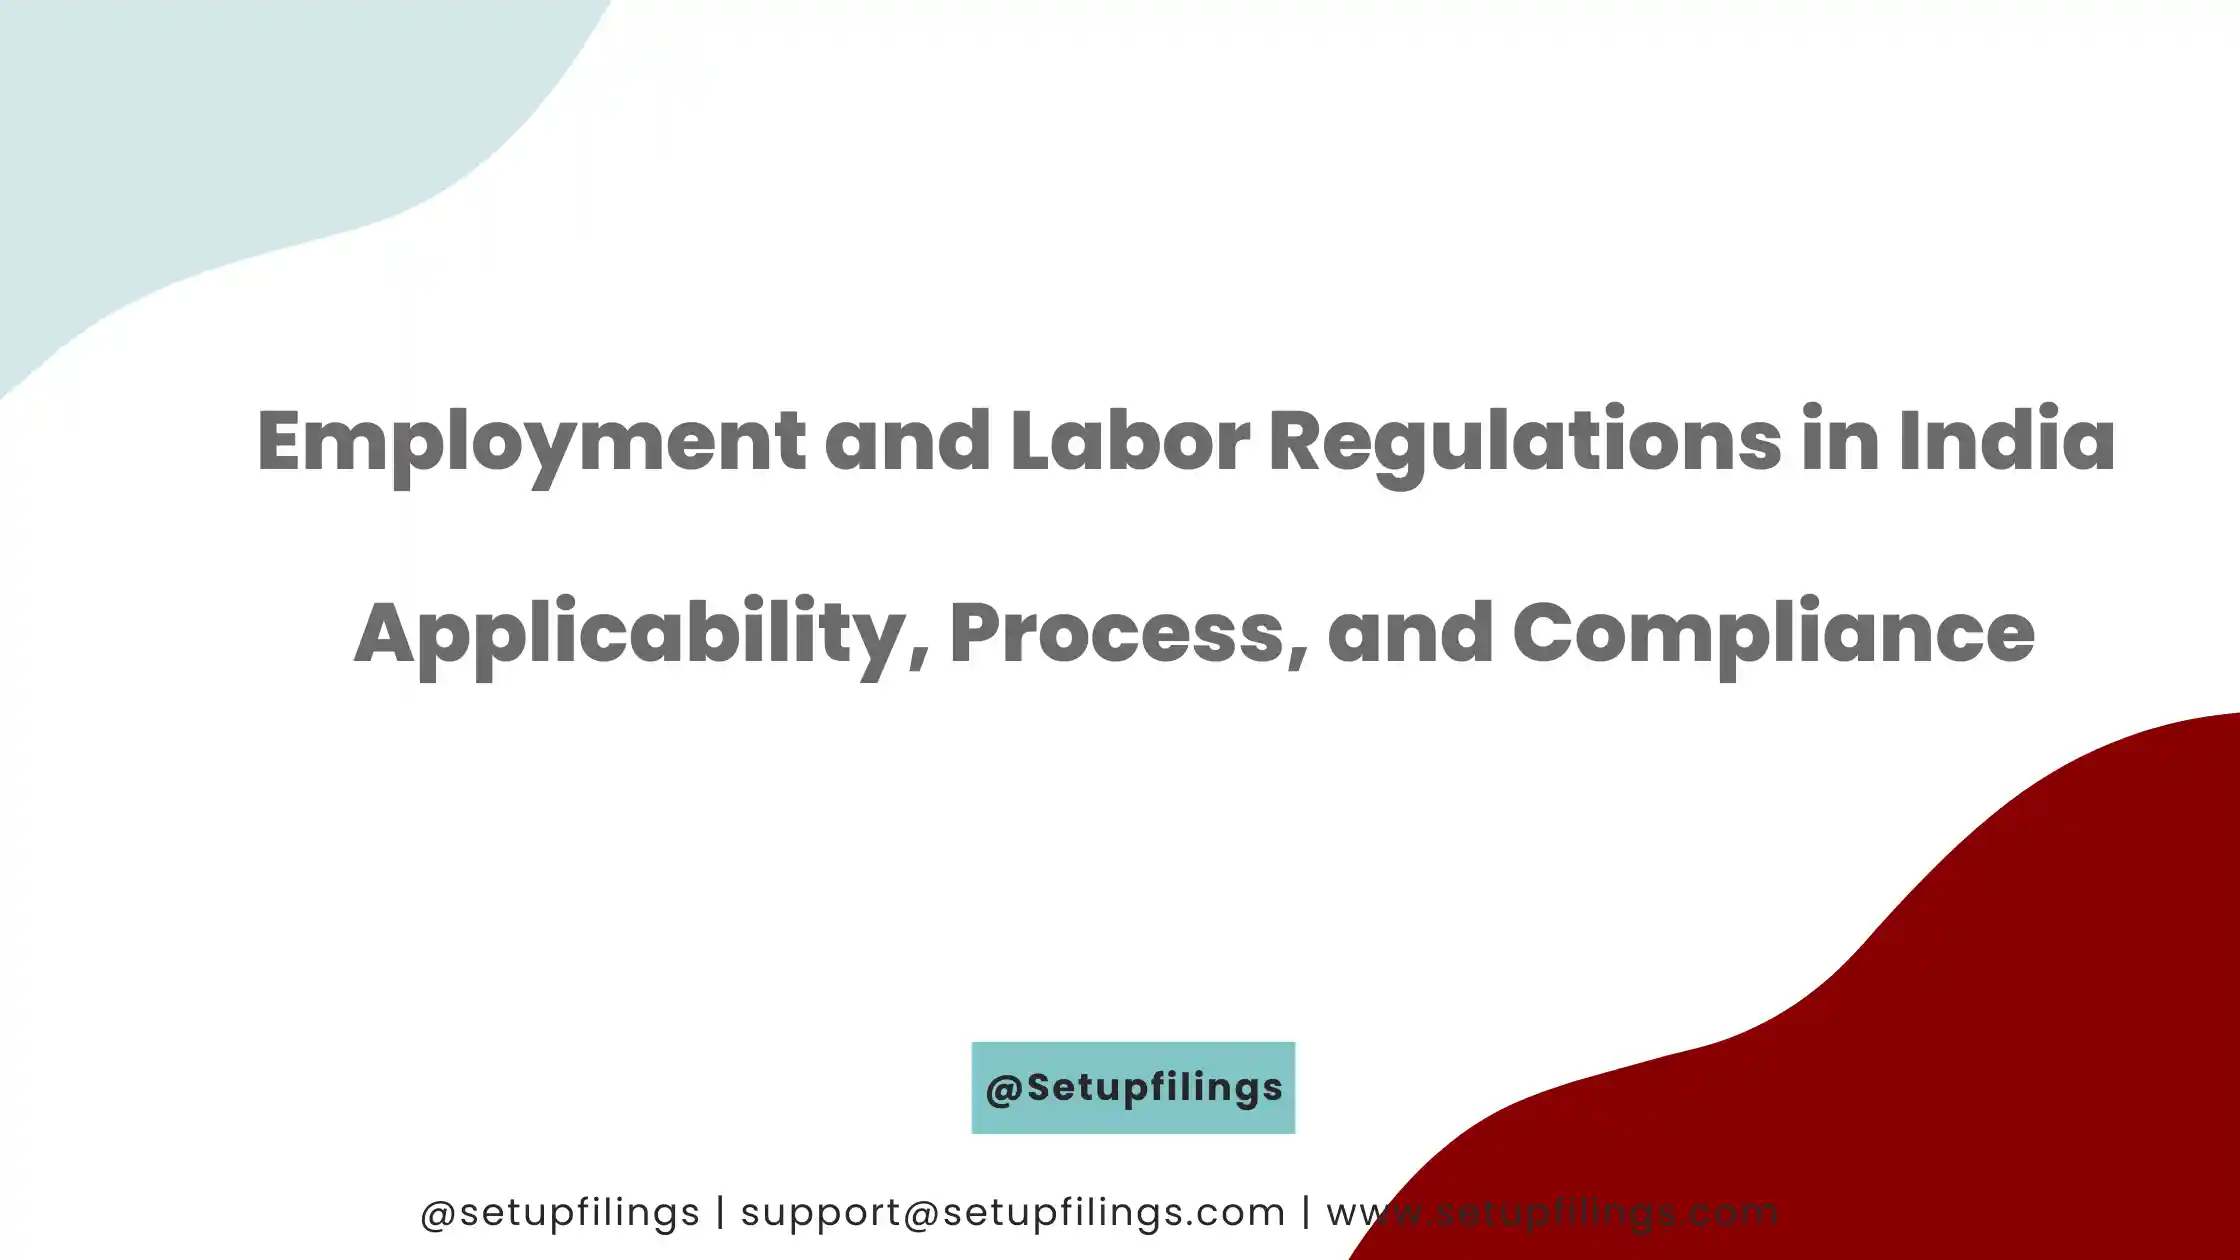 Employment and Labor Regulations in India - Applicability, Process, and Compliance